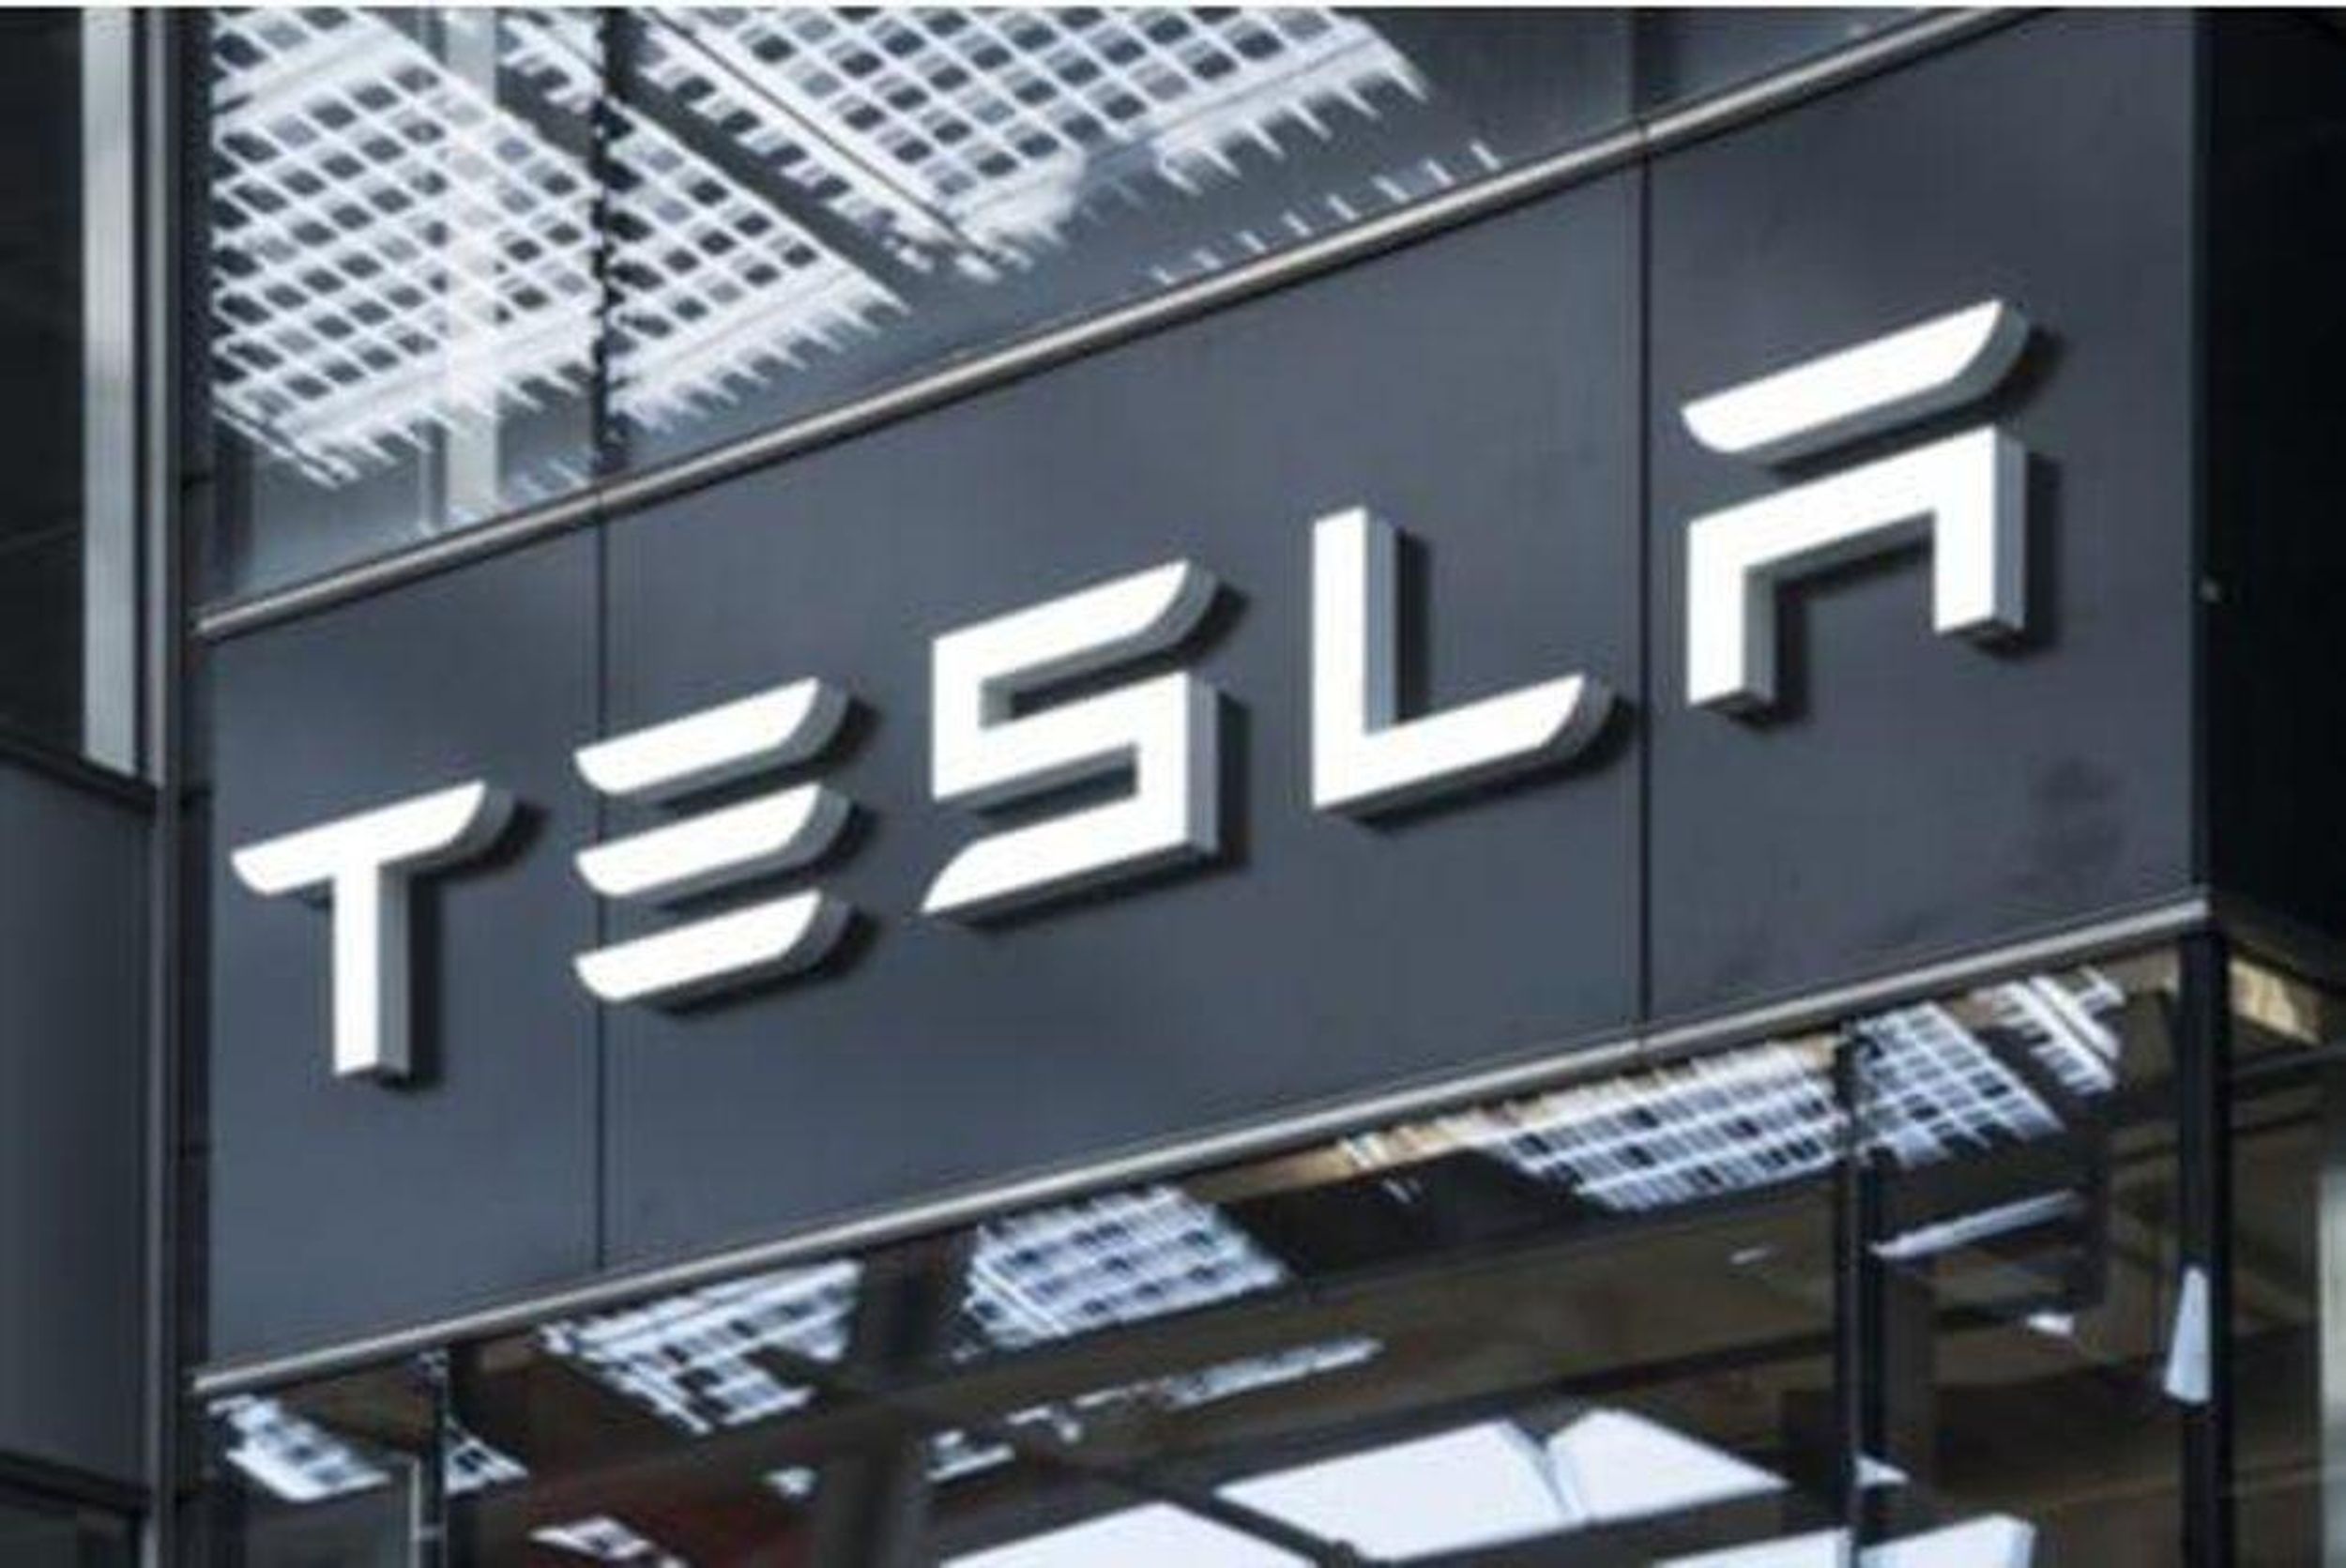 building with "tesla" on front